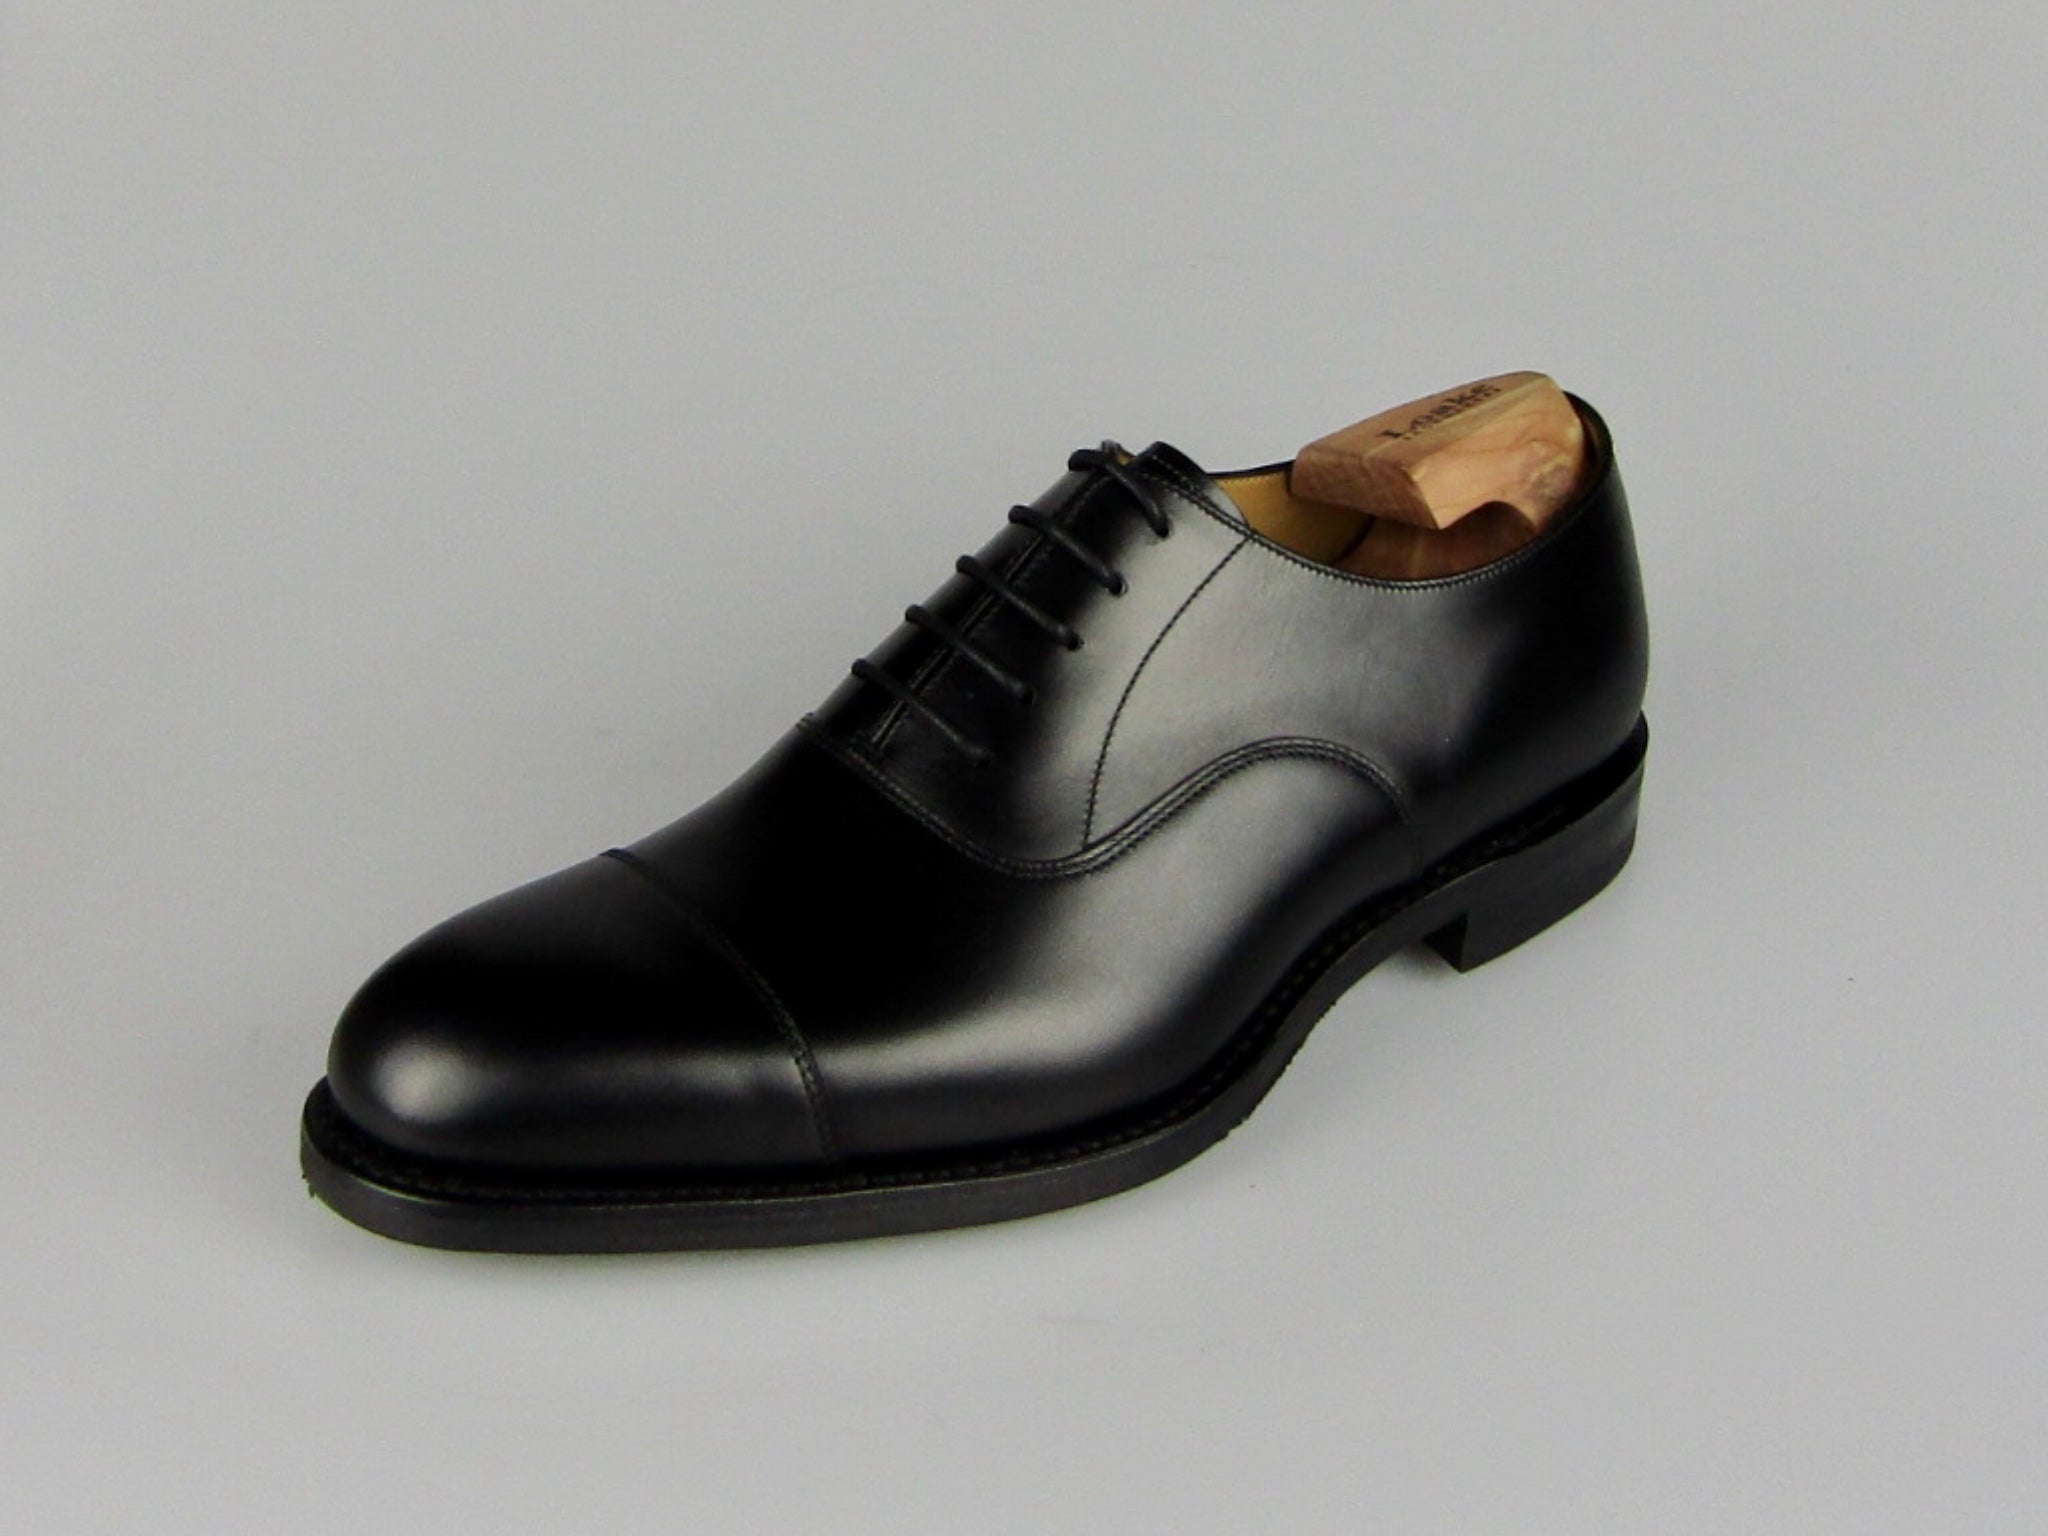 Loake Archway Size 7.5